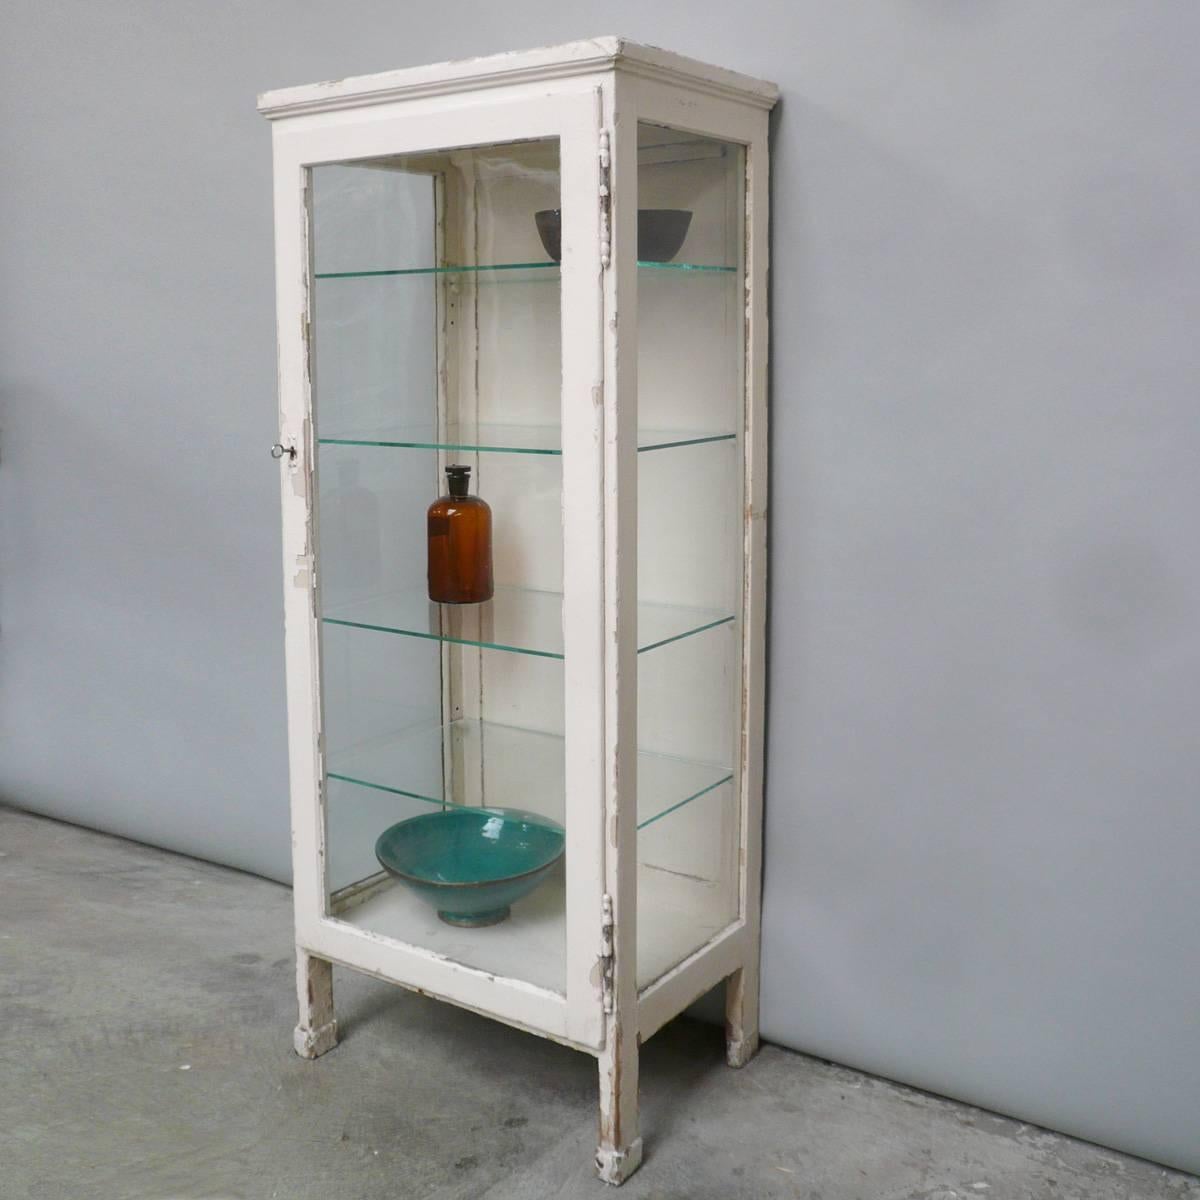 Medical wooden cabinet, produced in the 1930s. The glass is the original antique glass. With four glass shelves. The lock and key work perfectly.